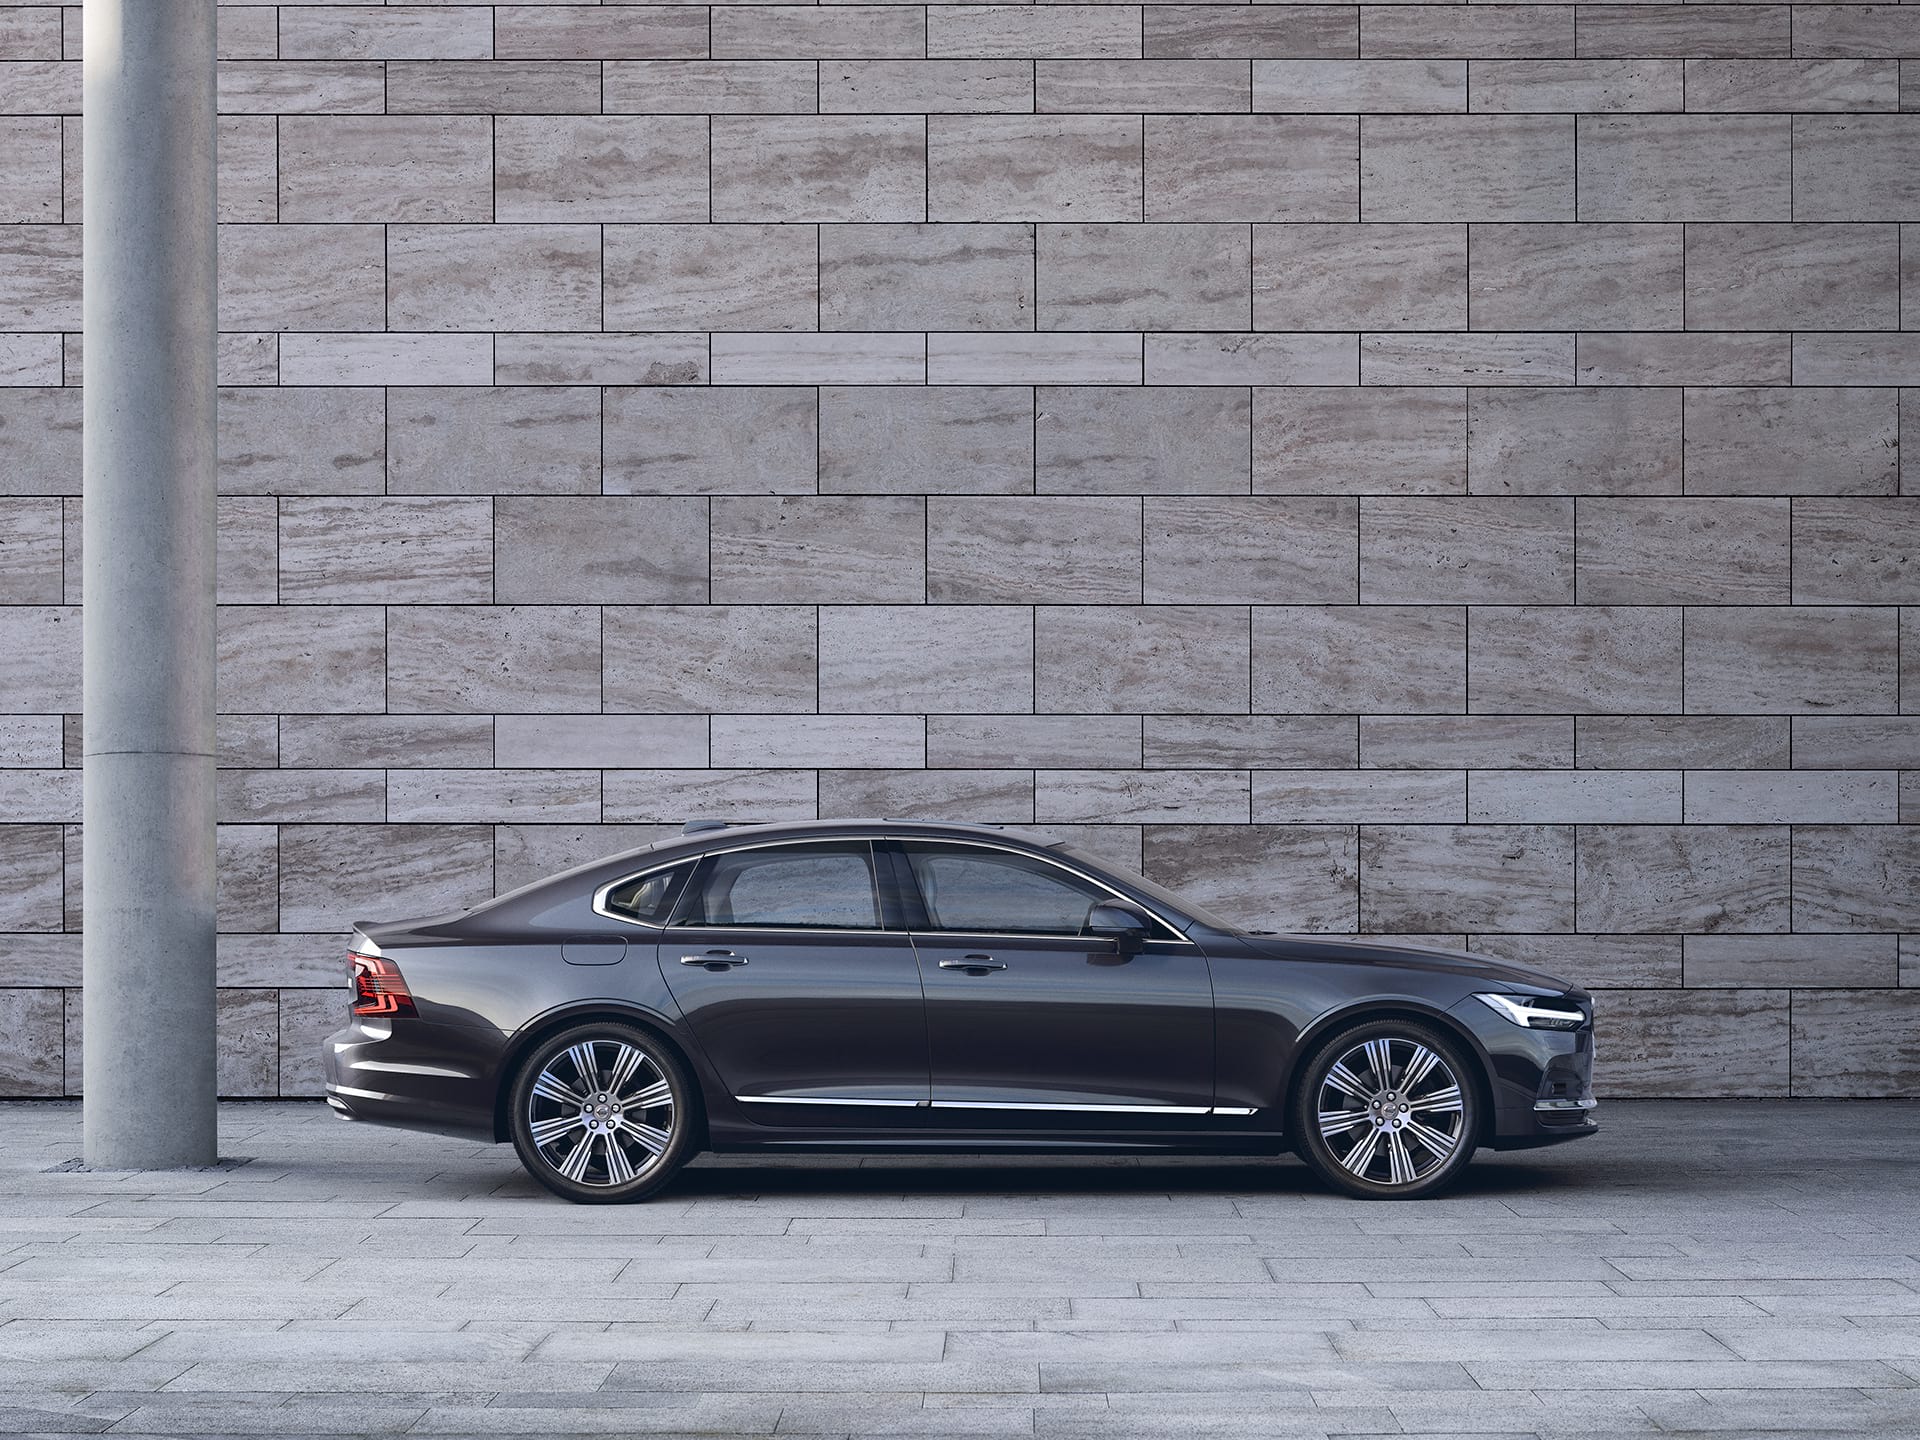 A dark Volvo S90 is parked in front of a grey wall.